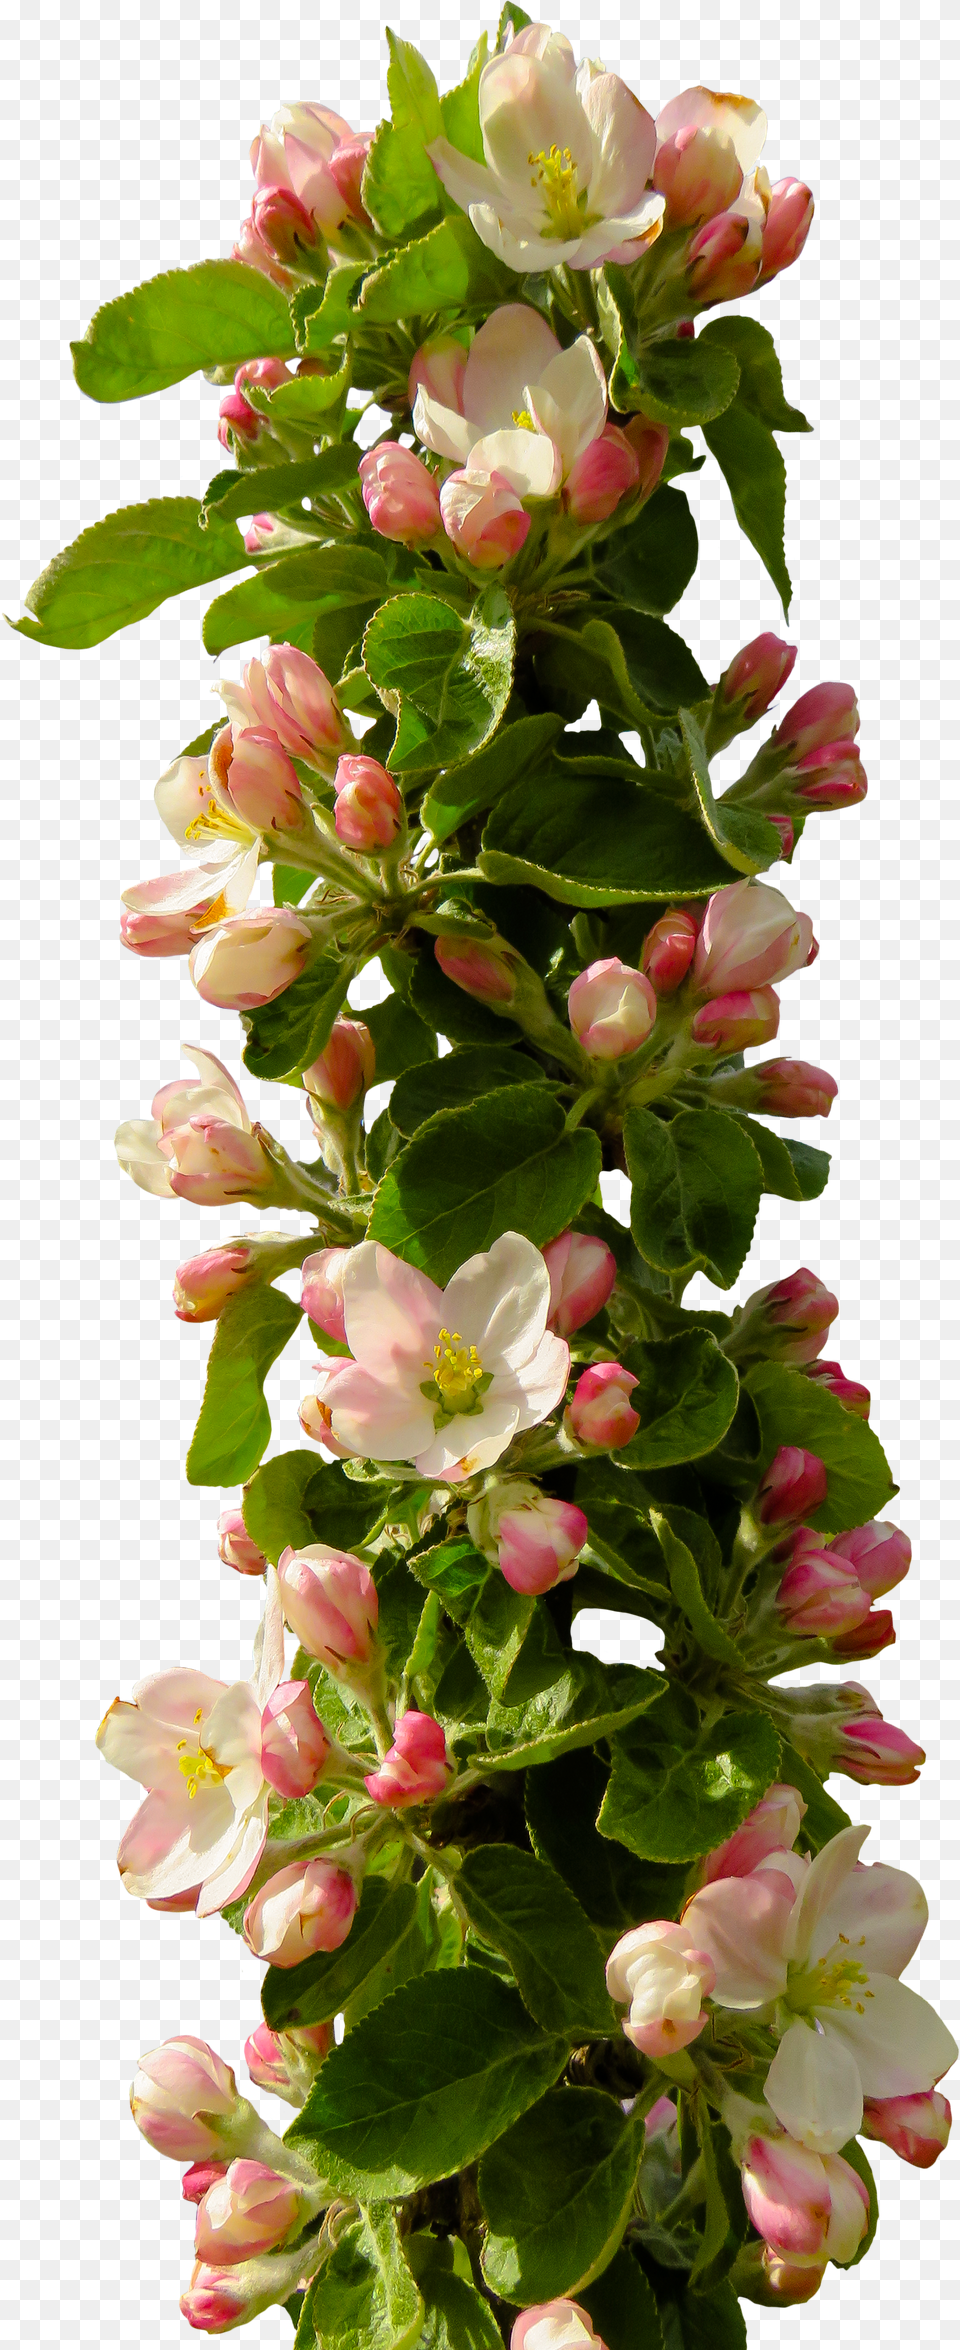 Spring Apple Blossom Blossom Bloom Apple Tree Flower Composition Free Png